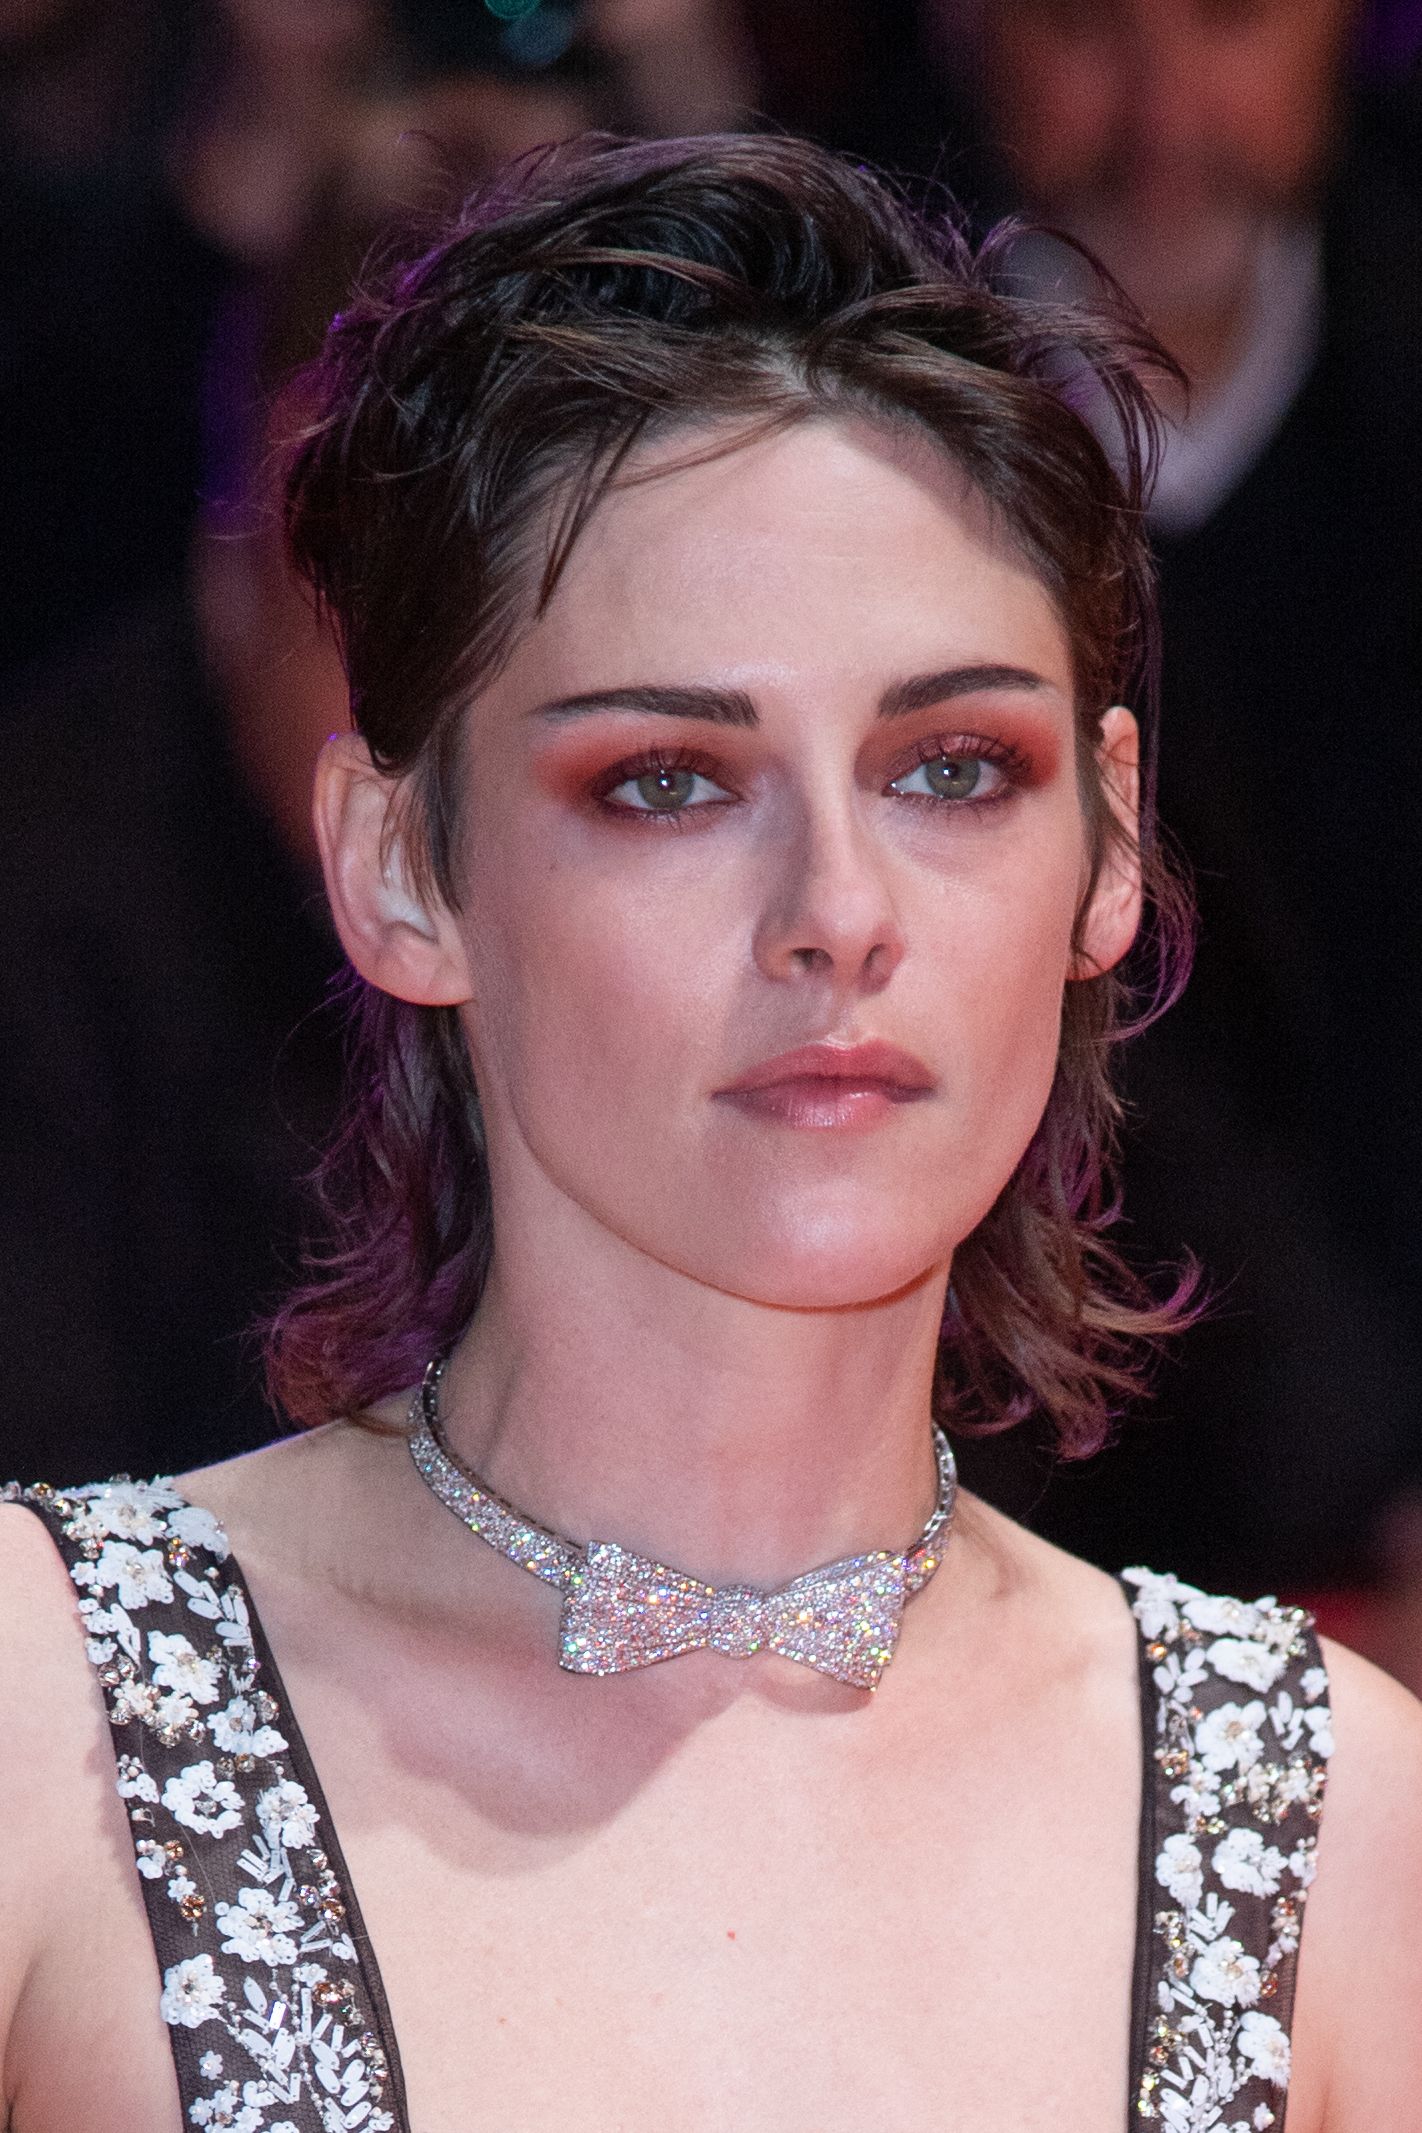 Kristen Stewart Has a New Two-Toned Hair Color That's Both Chic and Grunge  | Glamour